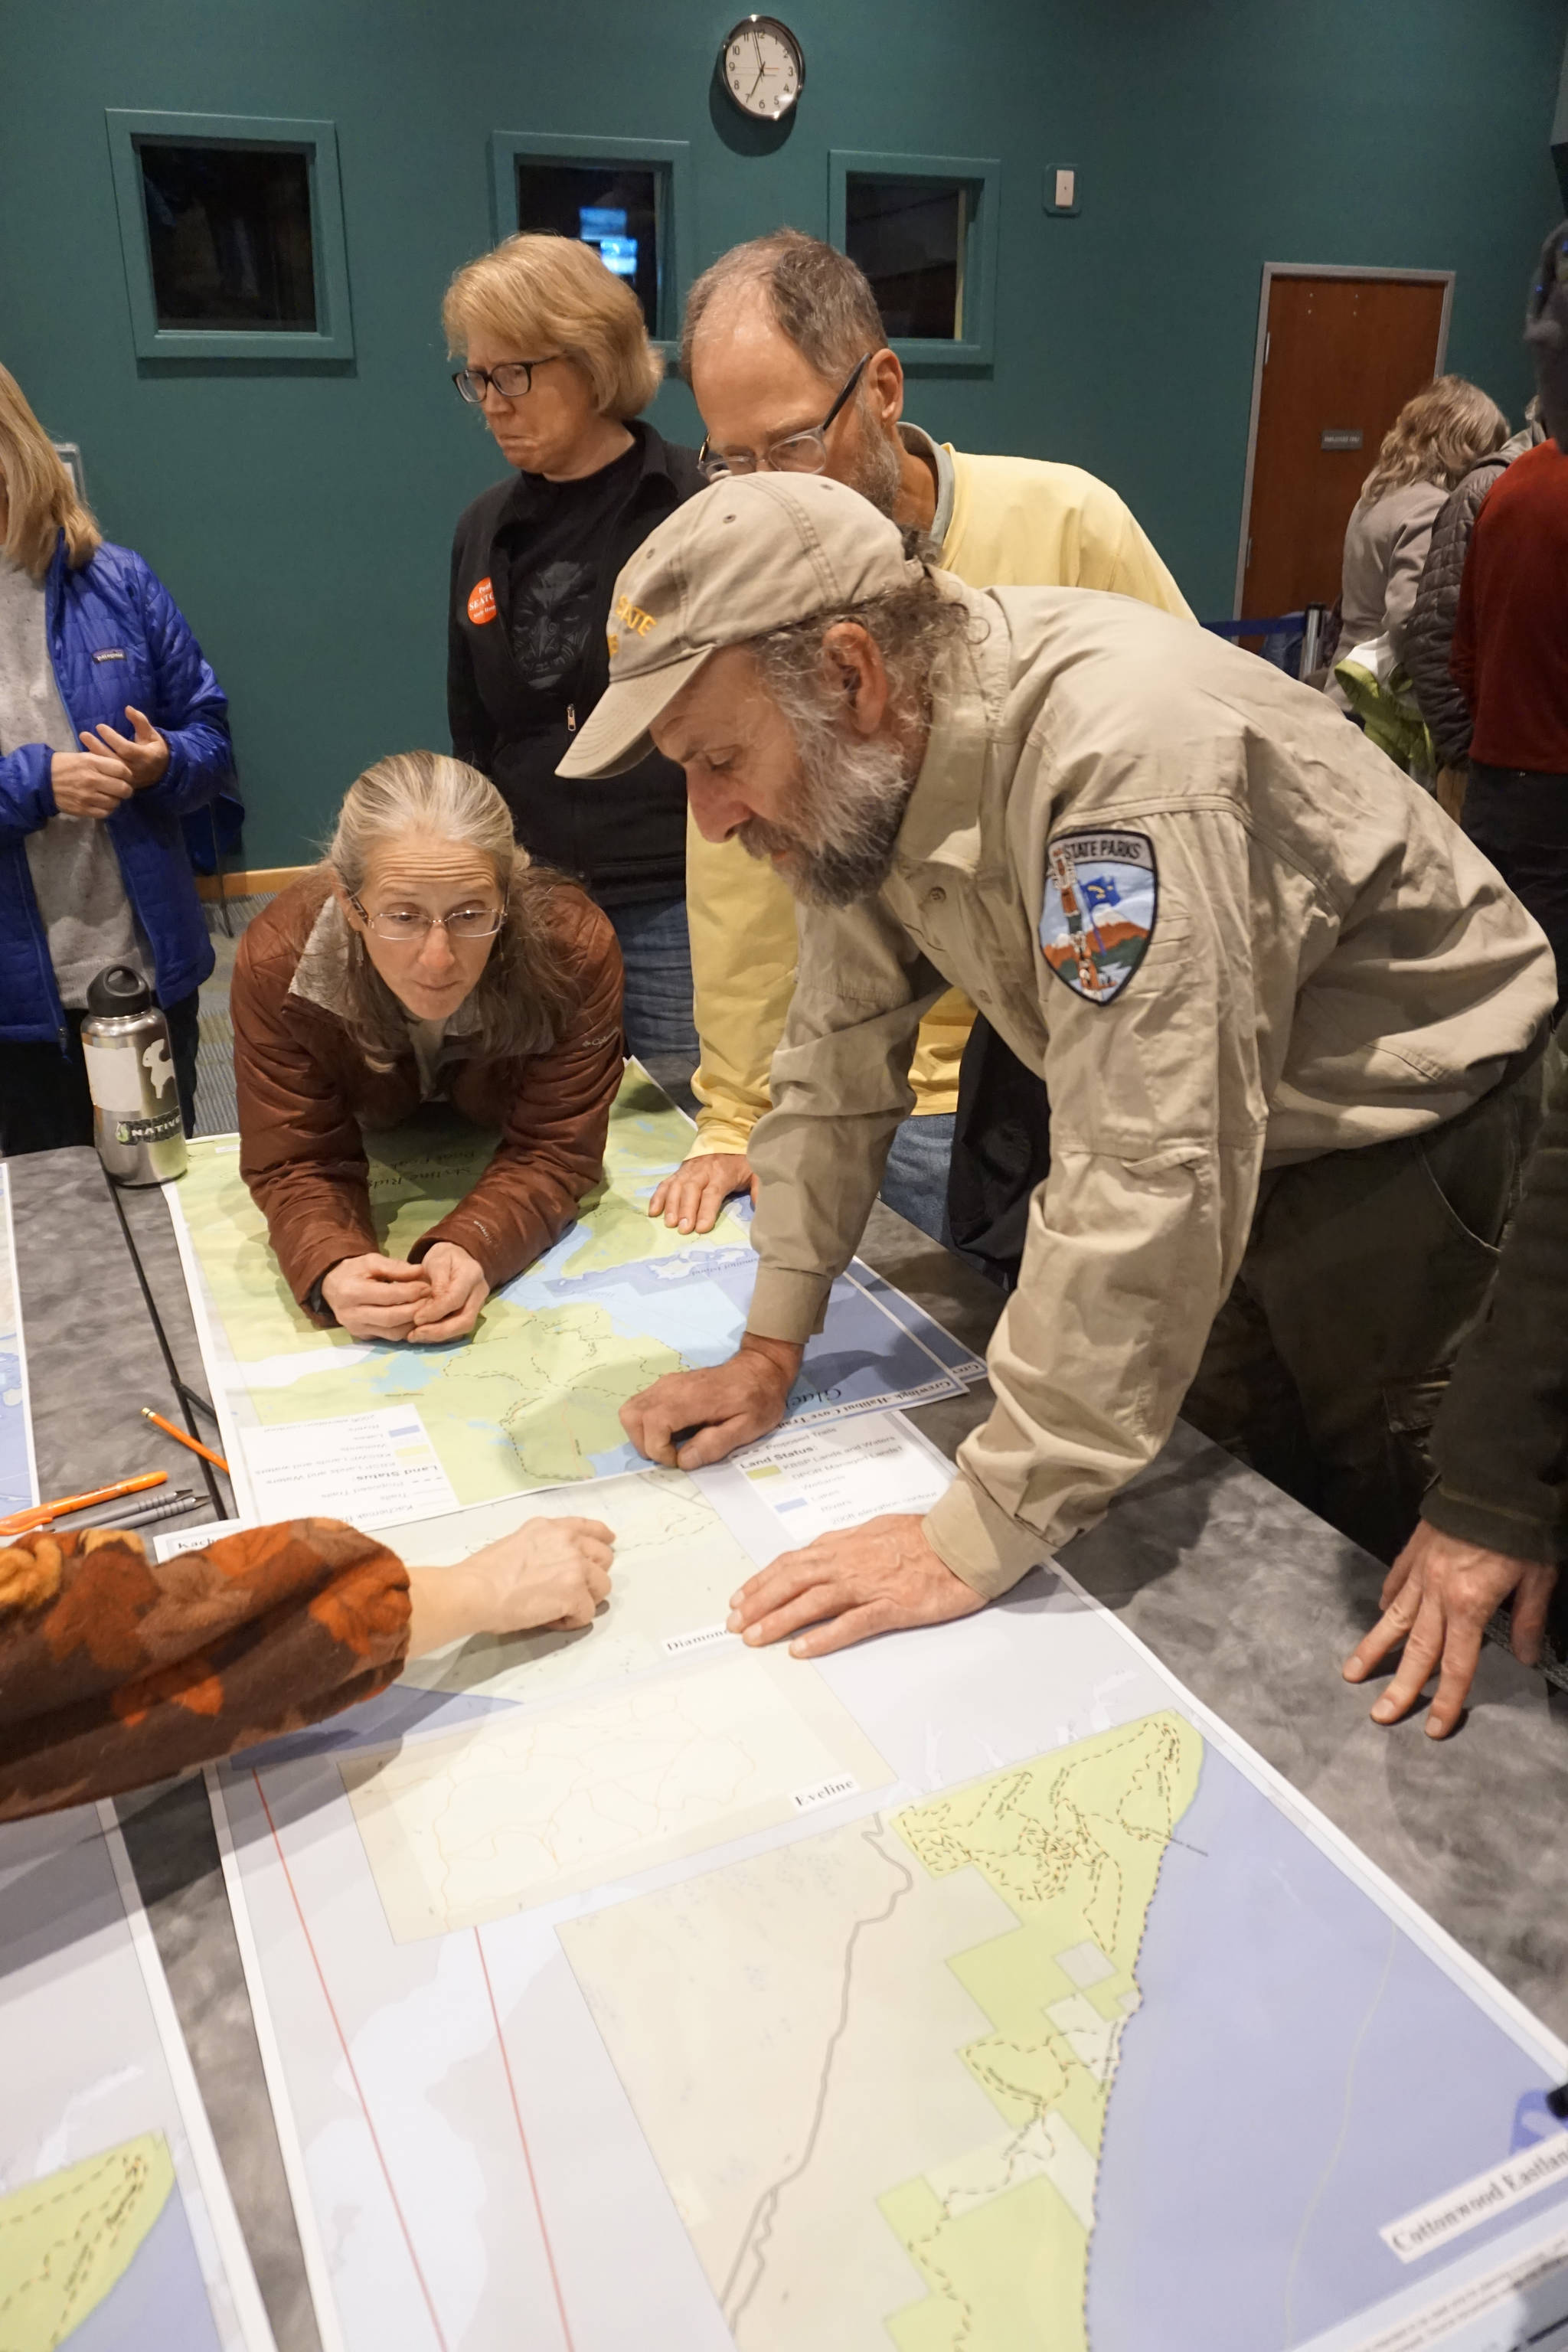 Jennifer Edwards, left, and Alaska State Parks specialist Eric Clarke, right, discuss the Diamond Creek trails portion of the Kachemak Bay State Park and State Wilderness Park draft management plan at an open house on the plan on Oct. 29, 2018, at the Alaska Islands and Ocean Visitor Center in Homer, Alaska. (Photo by Michael Armstrong/Homer News)